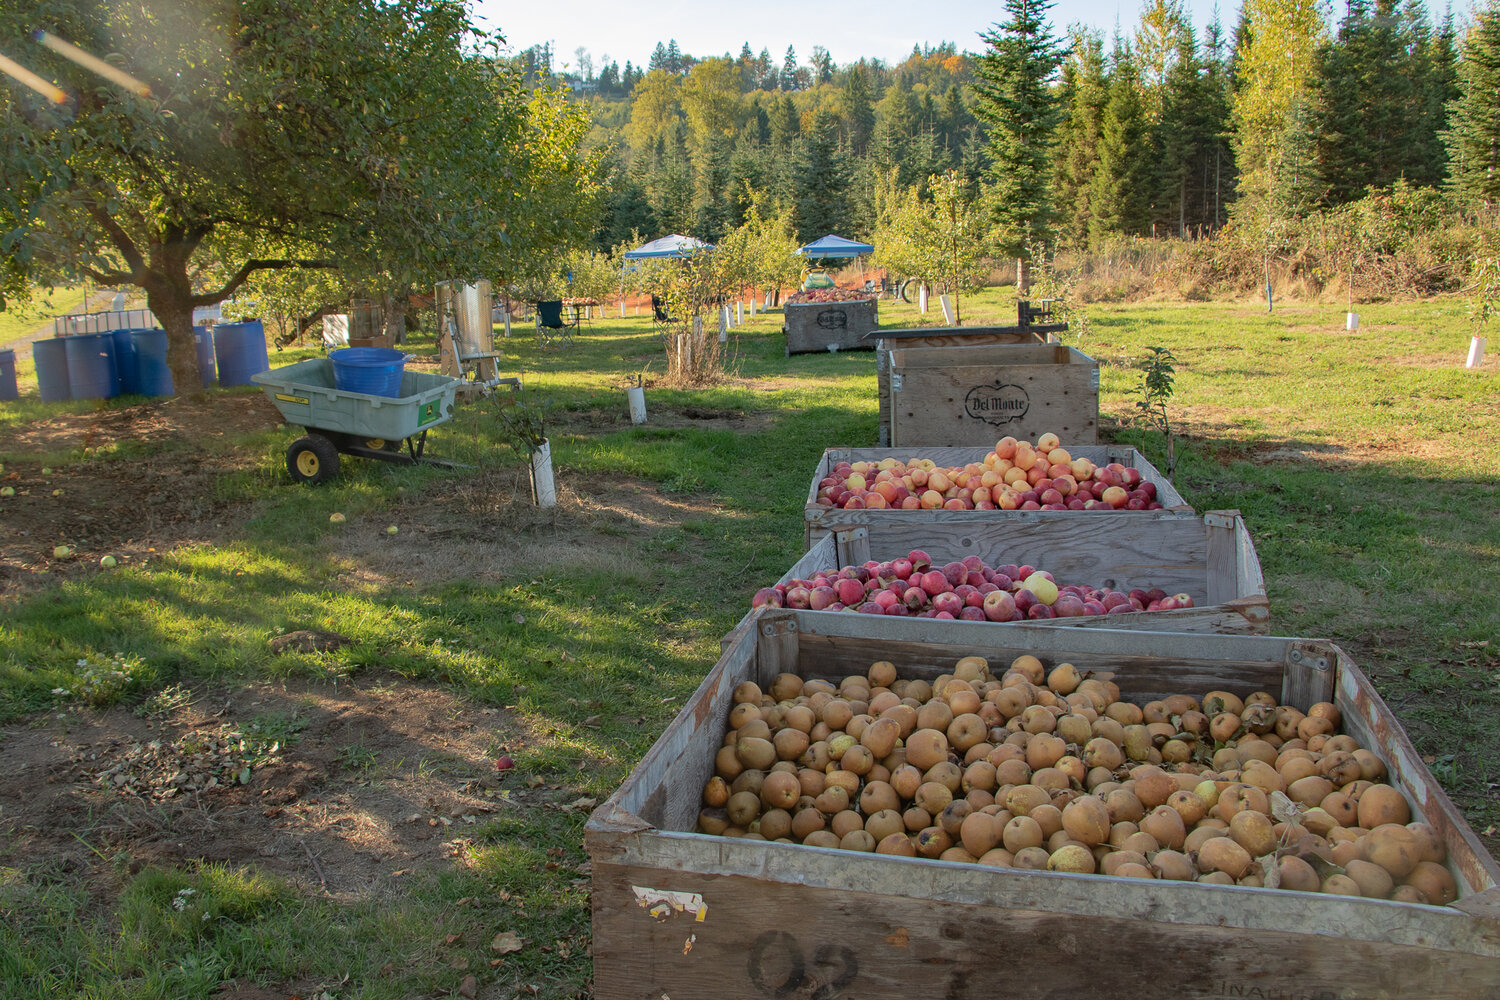 Apples fill bins at 3 Dogs Cider and Brewstillery in Silver Creek on Sunday, Oct. 8.